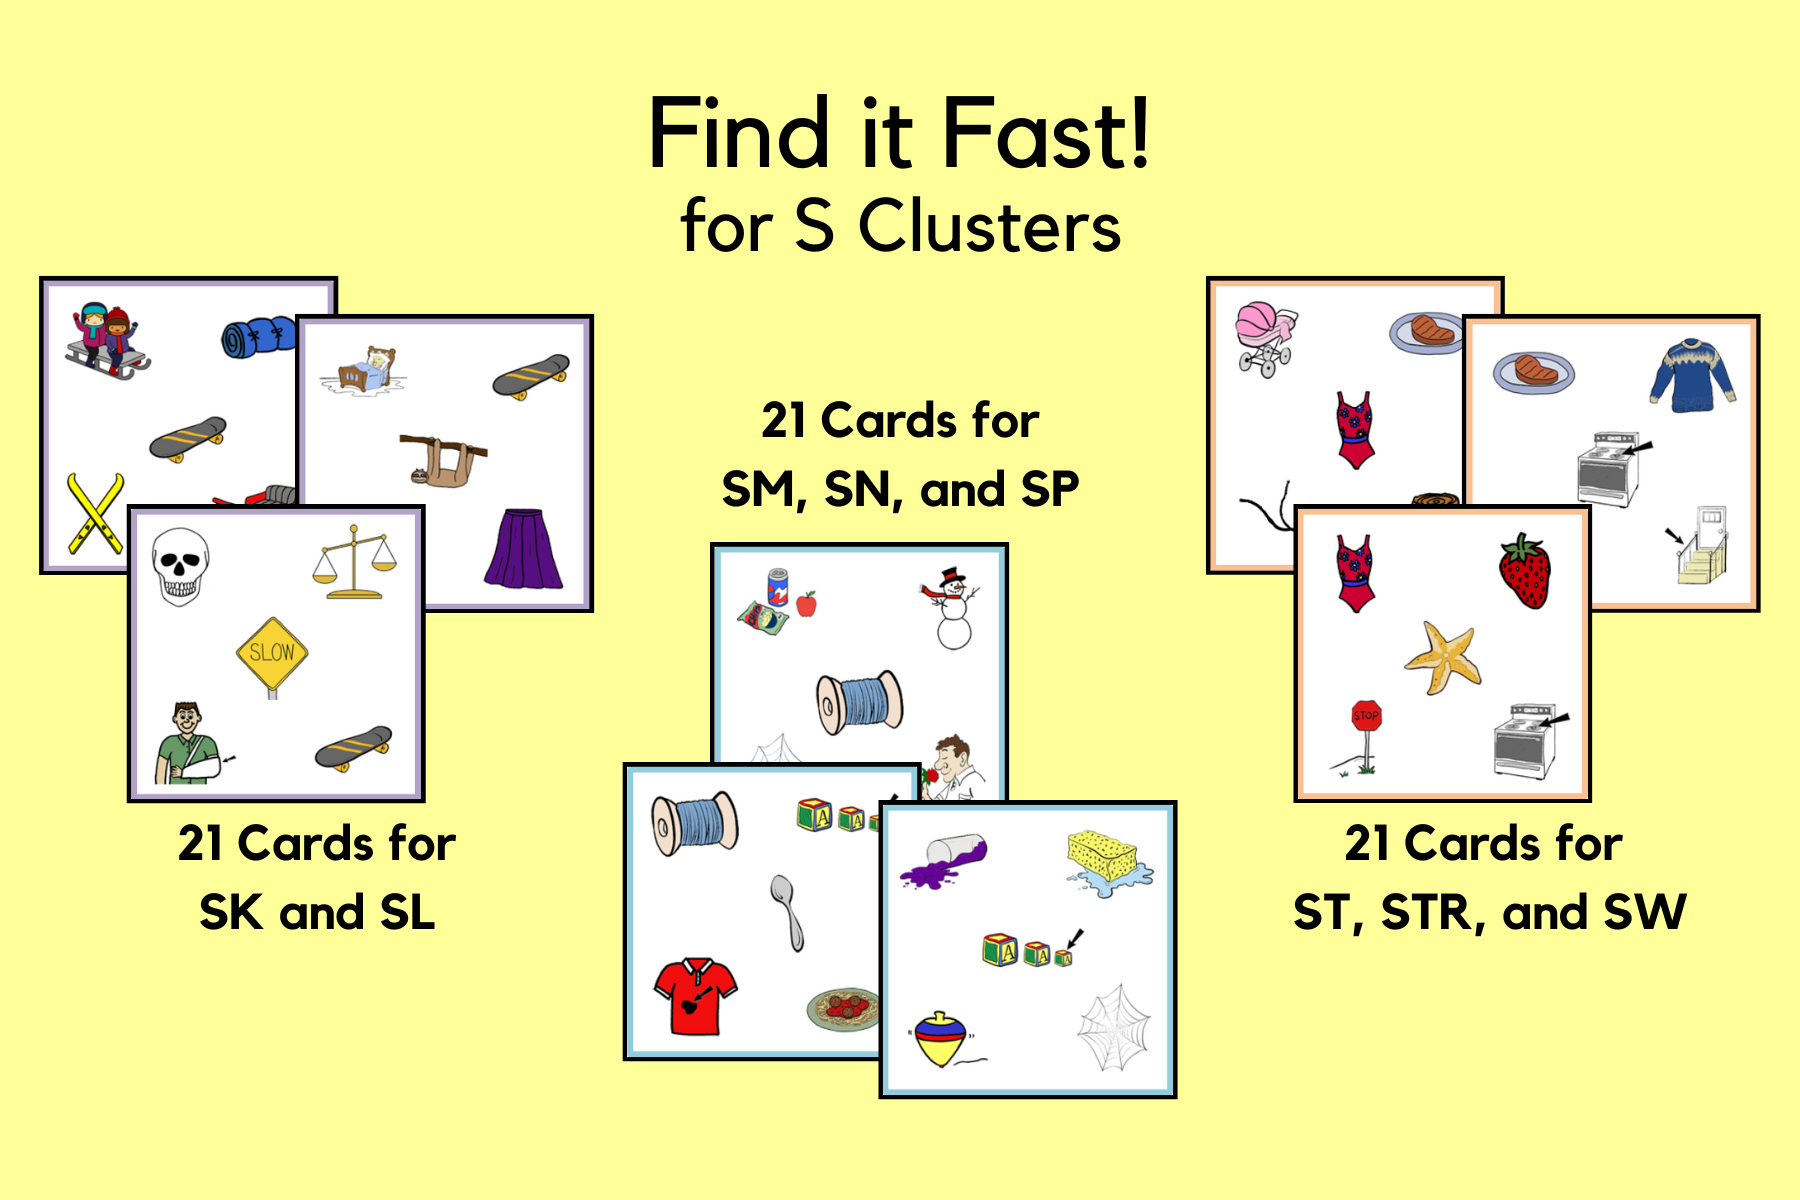 Find It Fast Game for S Clusters